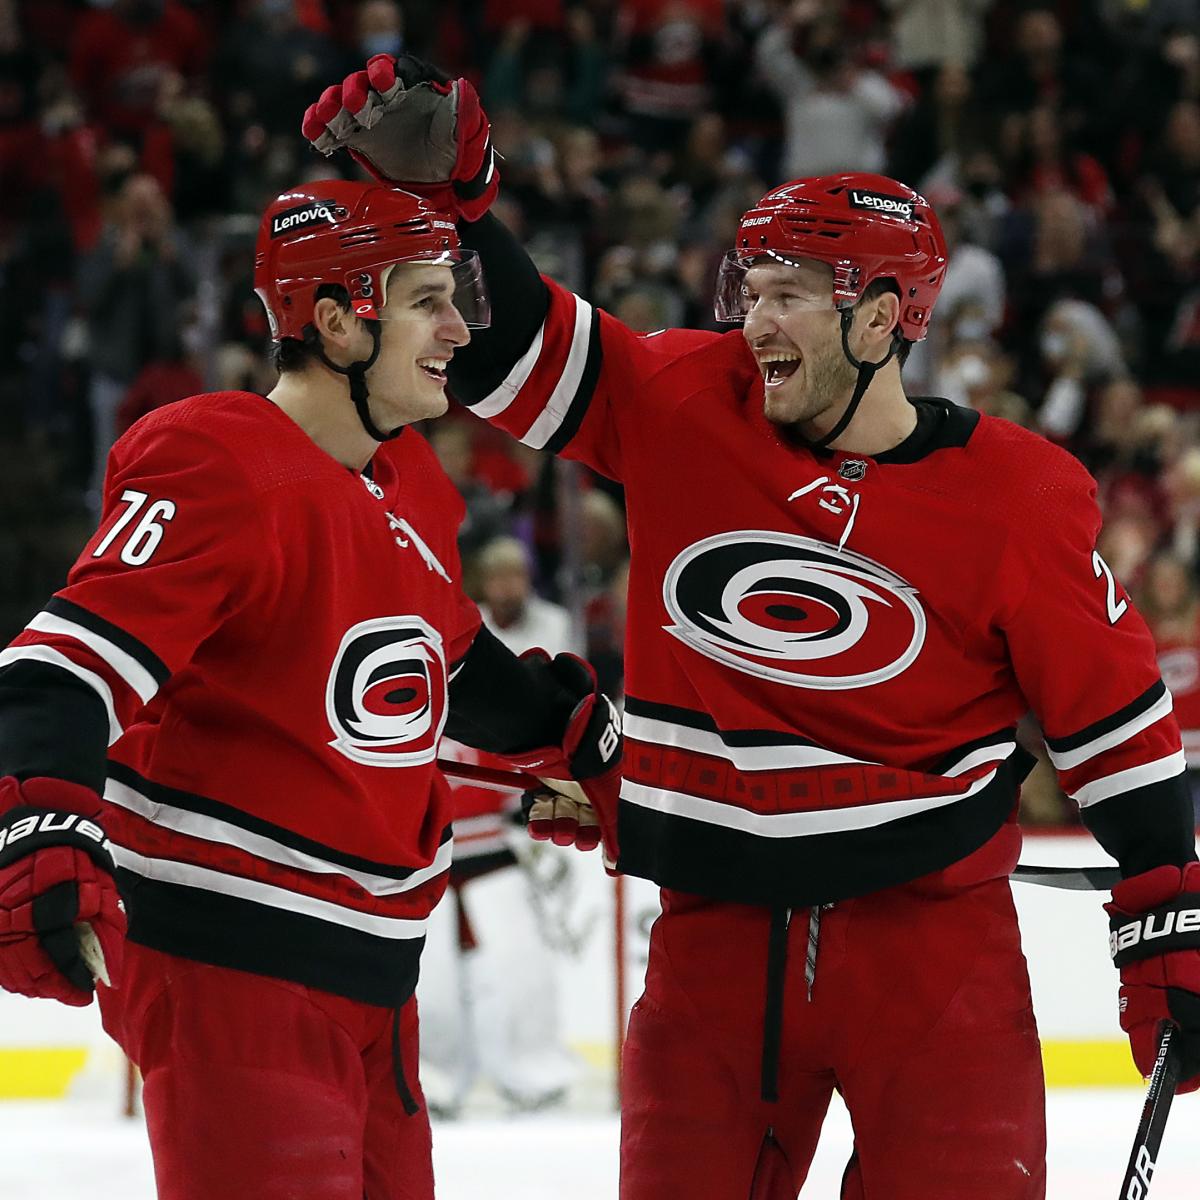 Ranking the top 10 Carolina Hurricanes players of all time